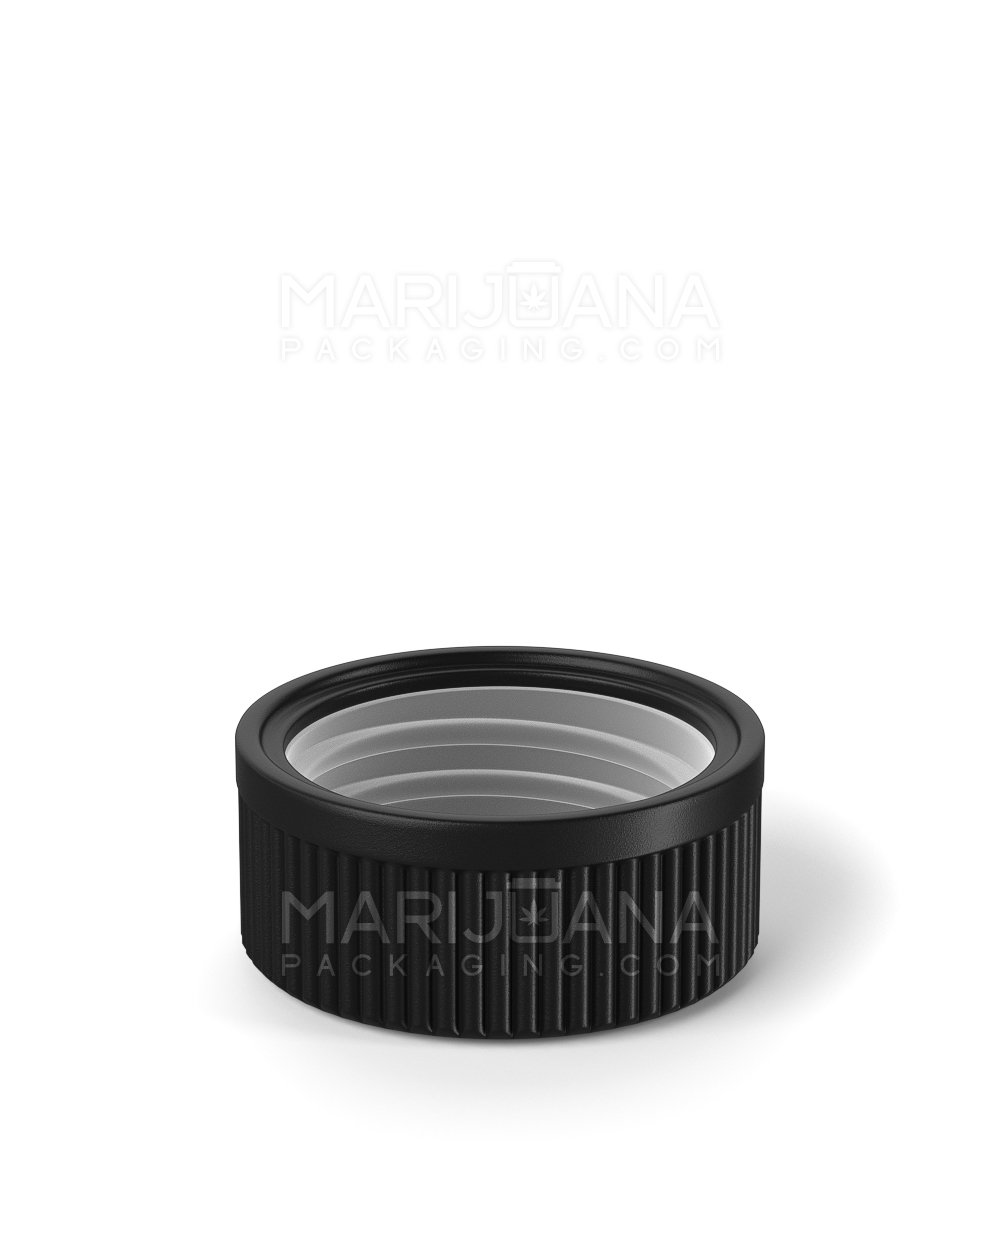 Child Resistant | Push Down & Turn Concentrate Container | 15mL - Black - 500 Count - 9